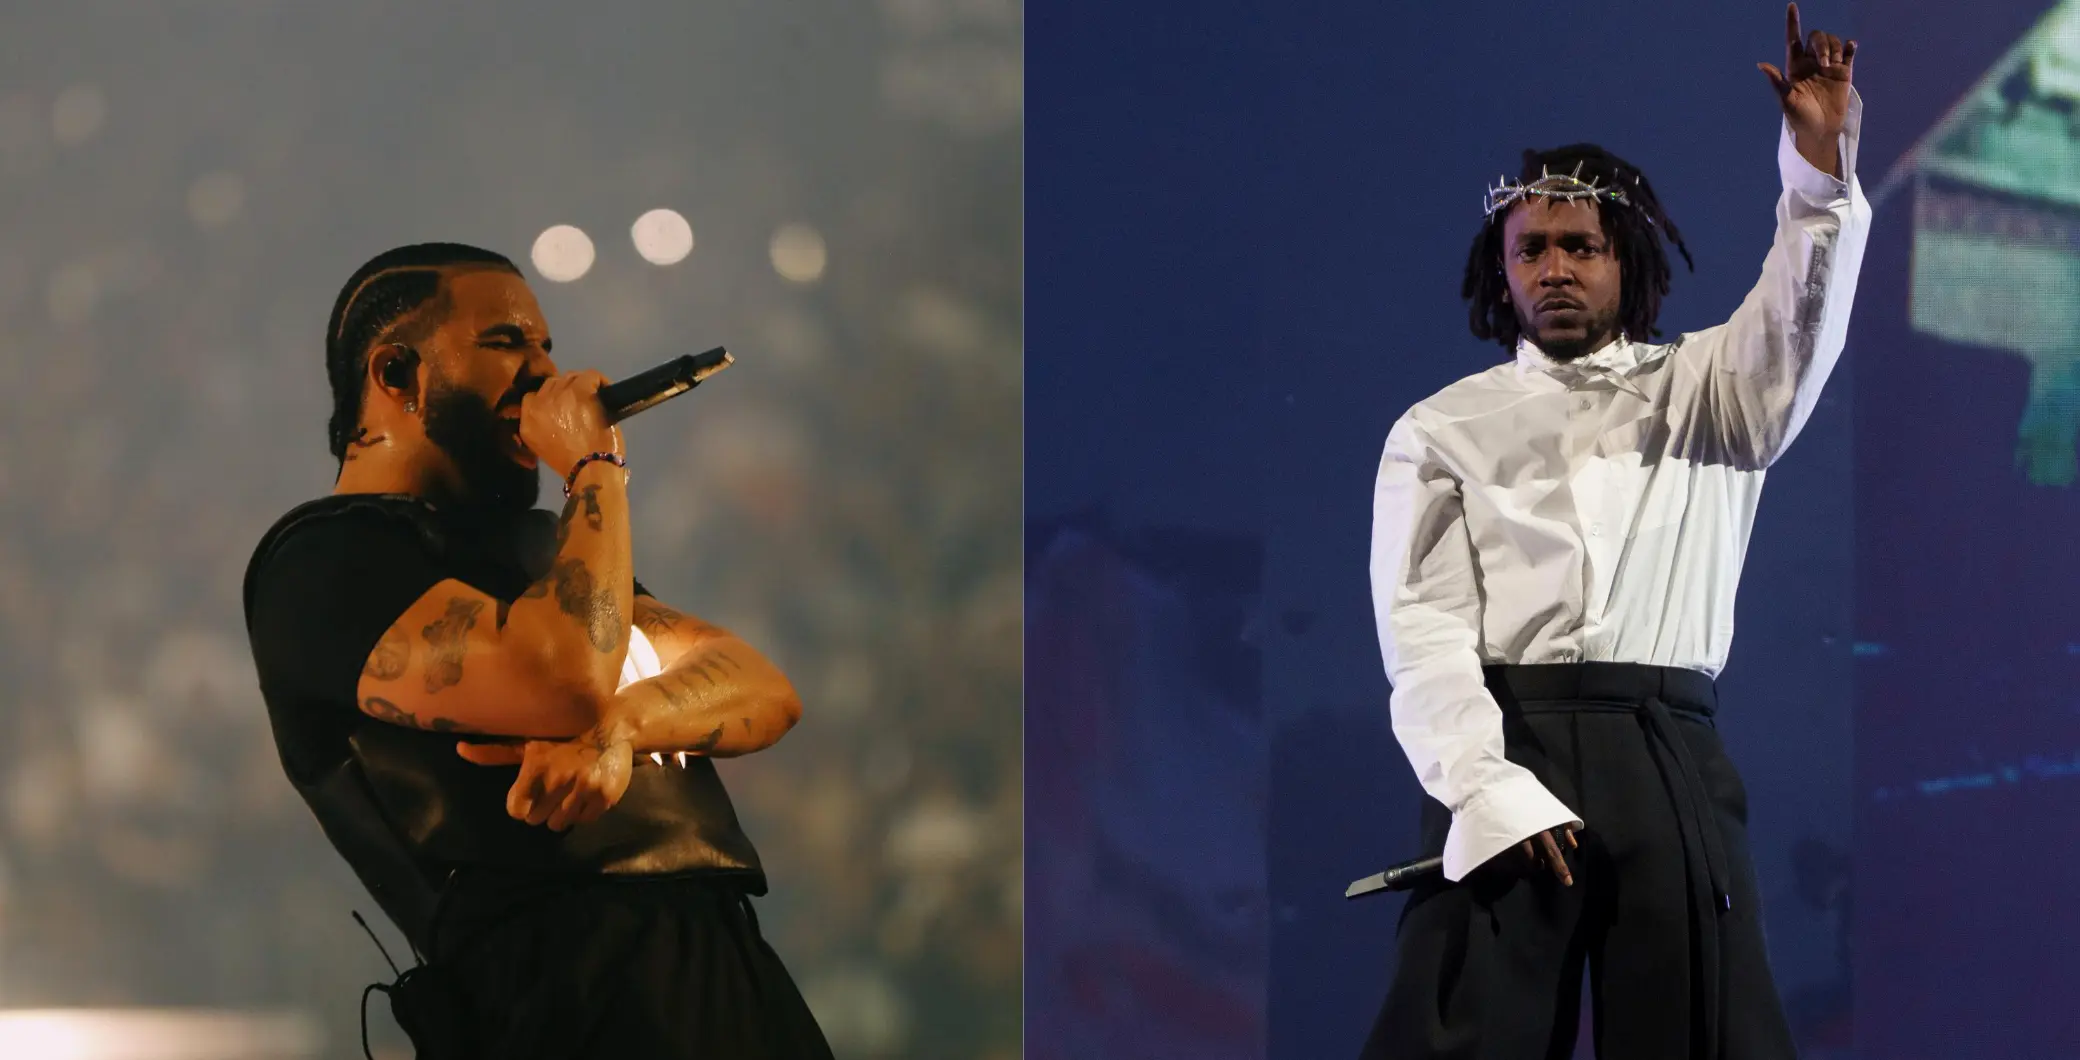 All eyes are on Drake and Kendrick Lamar, but has the internet ruined rap battle culture? Here’s what an expert says